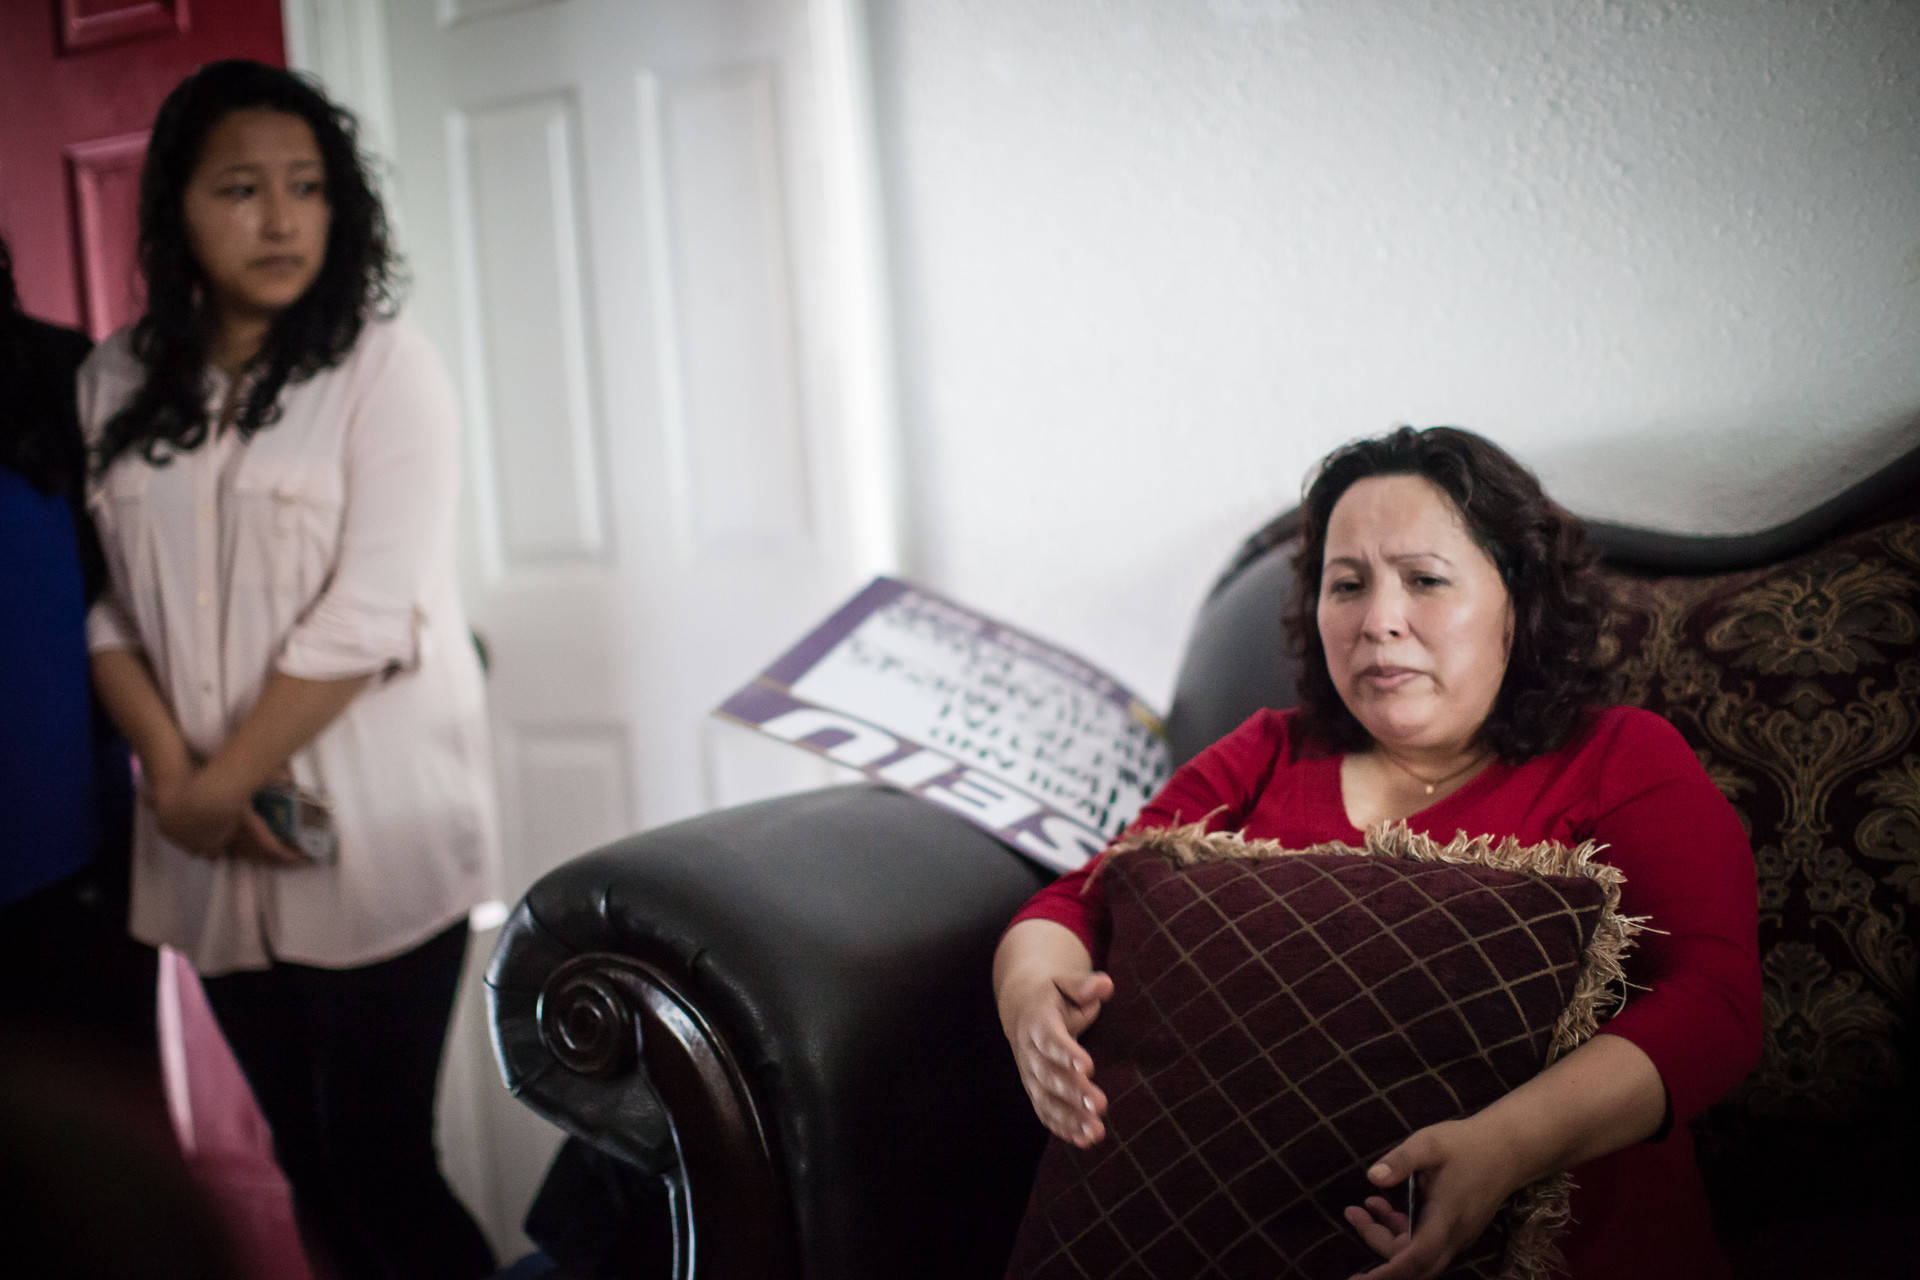 Maria Mendoza-Sanchez sits on a couch in her Oakland home on Aug. 16, 2017, hours before she, her husband and son leave Oakland for Mexico City. Her daughter, Melin Sanchez, 21, cries as she watches her mother with concern. Deborah Svoboda/KQED